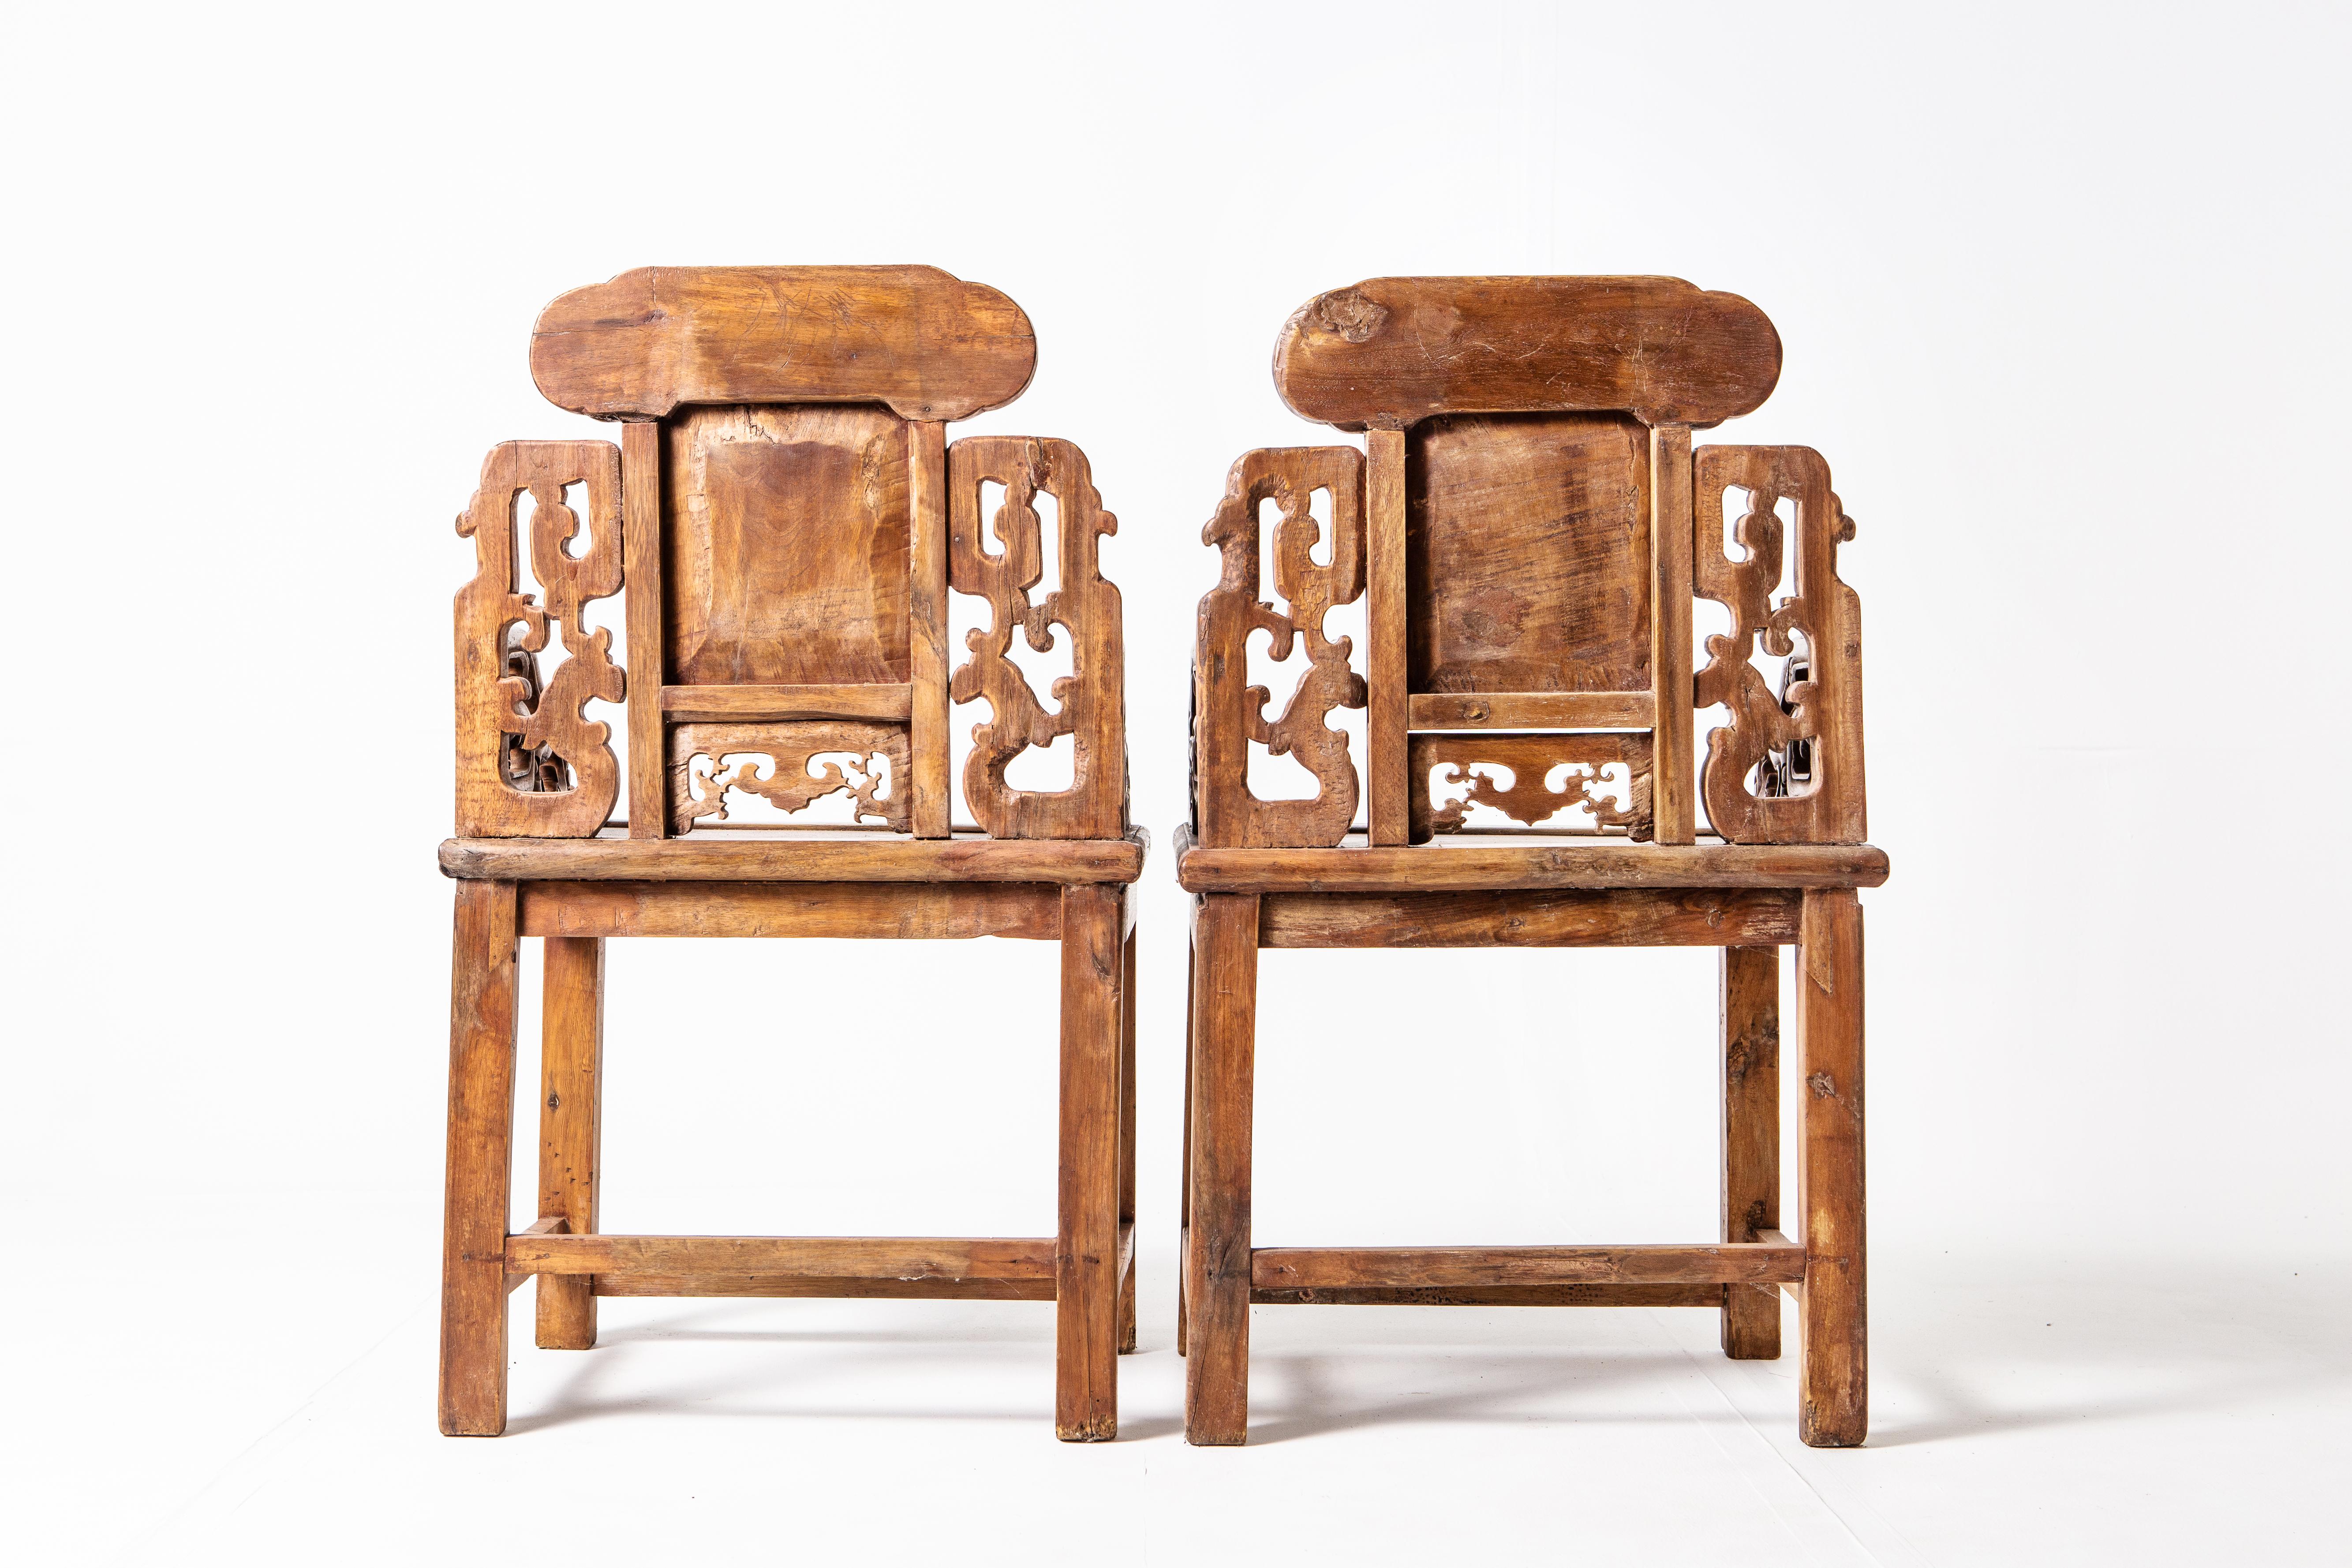 This beautiful and exquisitely carved pair of armchairs is from Szechuan Province, China and date to the middle-Qing dynasty. The frame of each back is in the form of a stylized archaistic dragon. The upper back suggests a cloud motif or auspicious